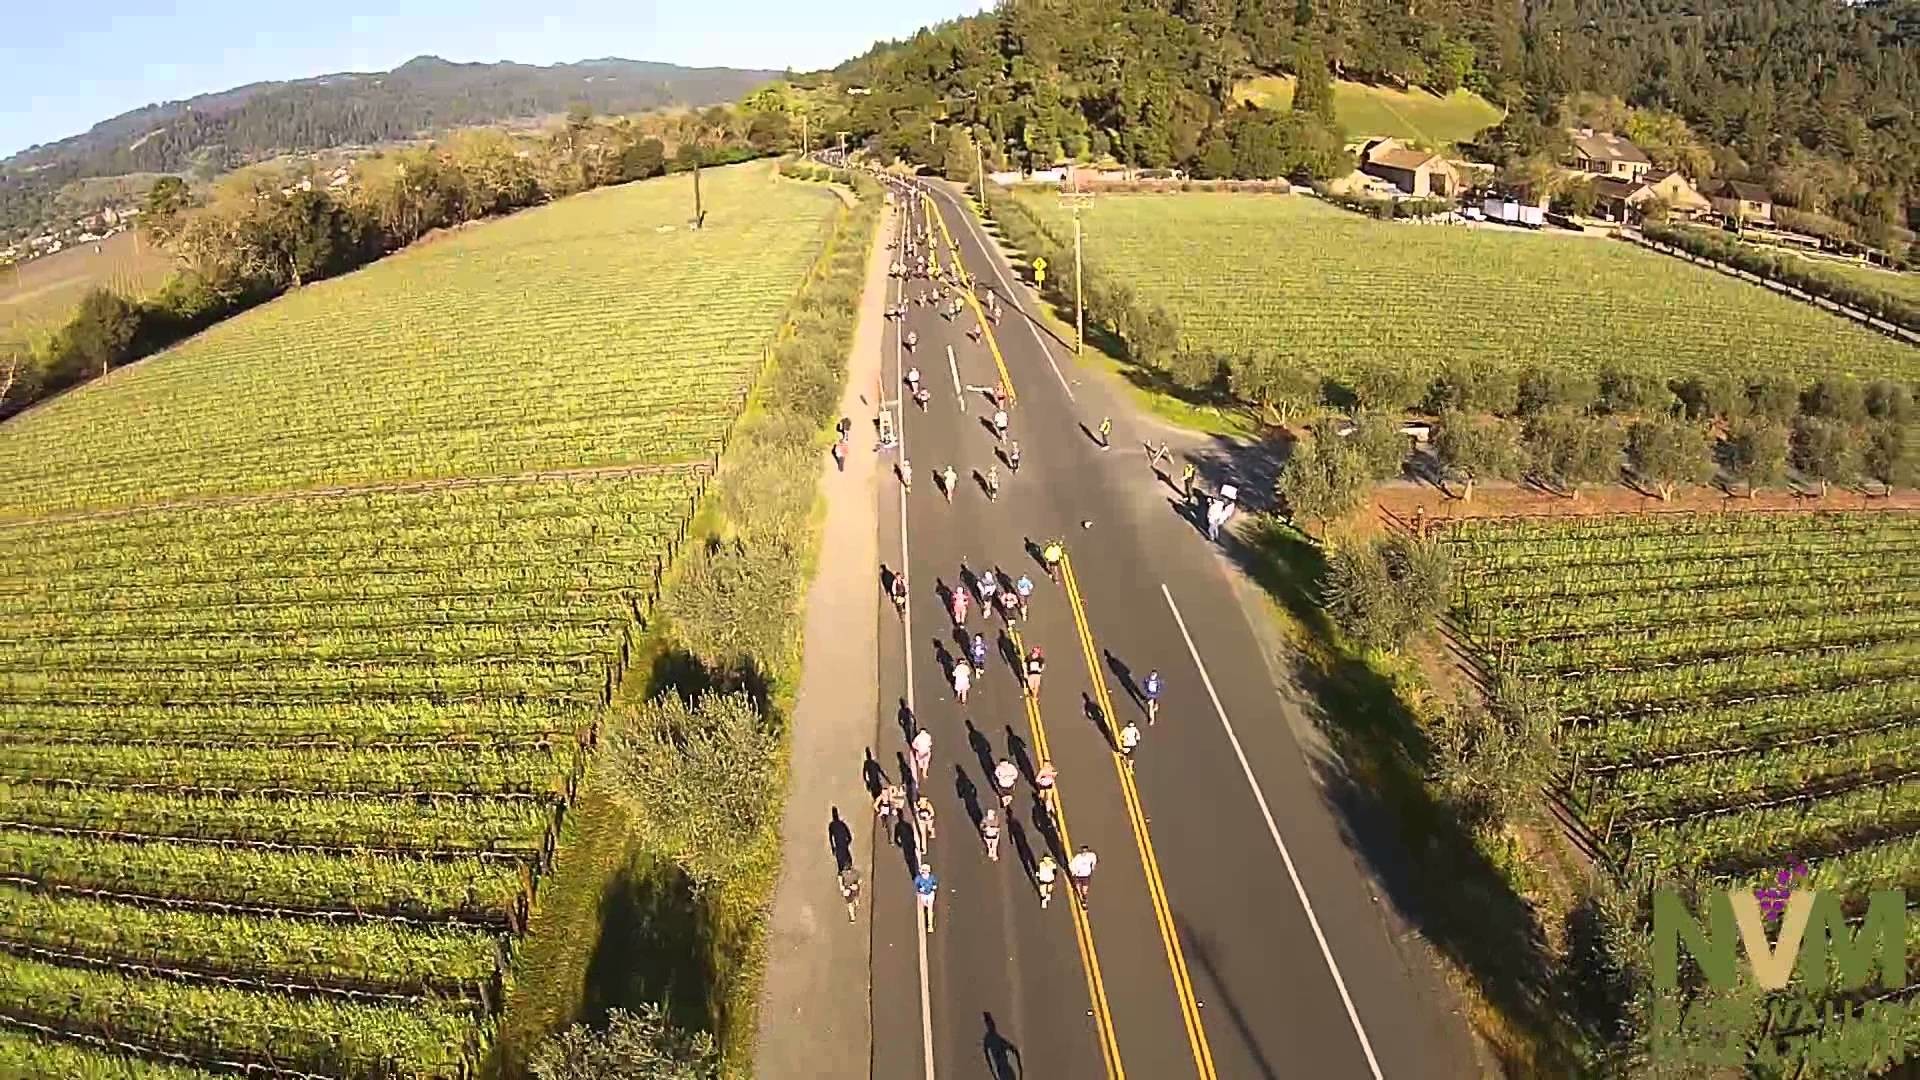 40 years running through the Picturesque Napa Valley  